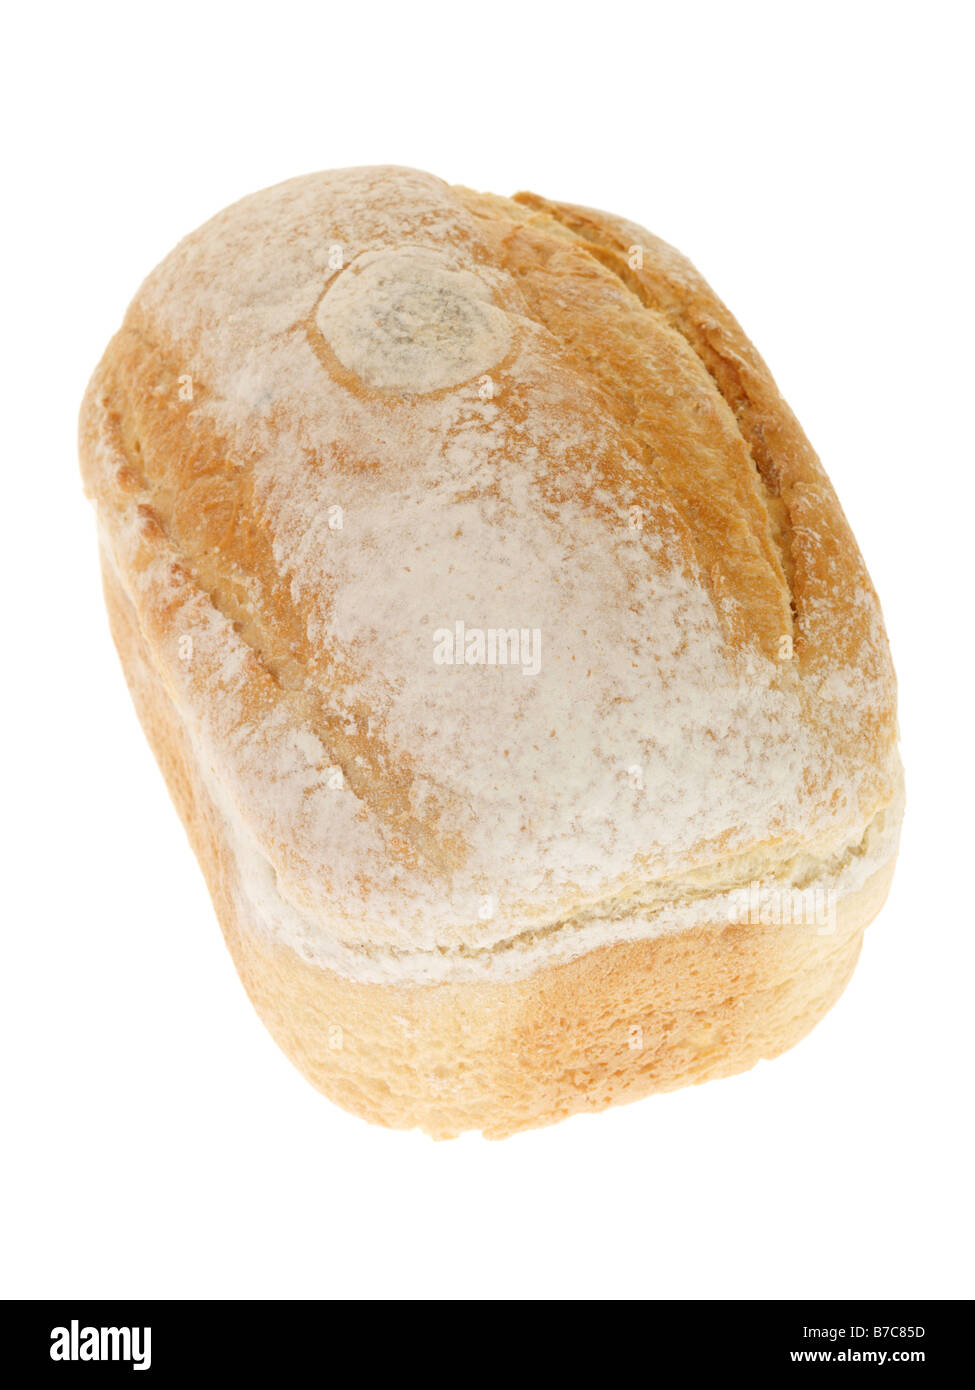 Fresh Loaf Of Baked Organic Farmhouse Bread Against A White Background With No People, Copy Space and A Clipping Path Stock Photo